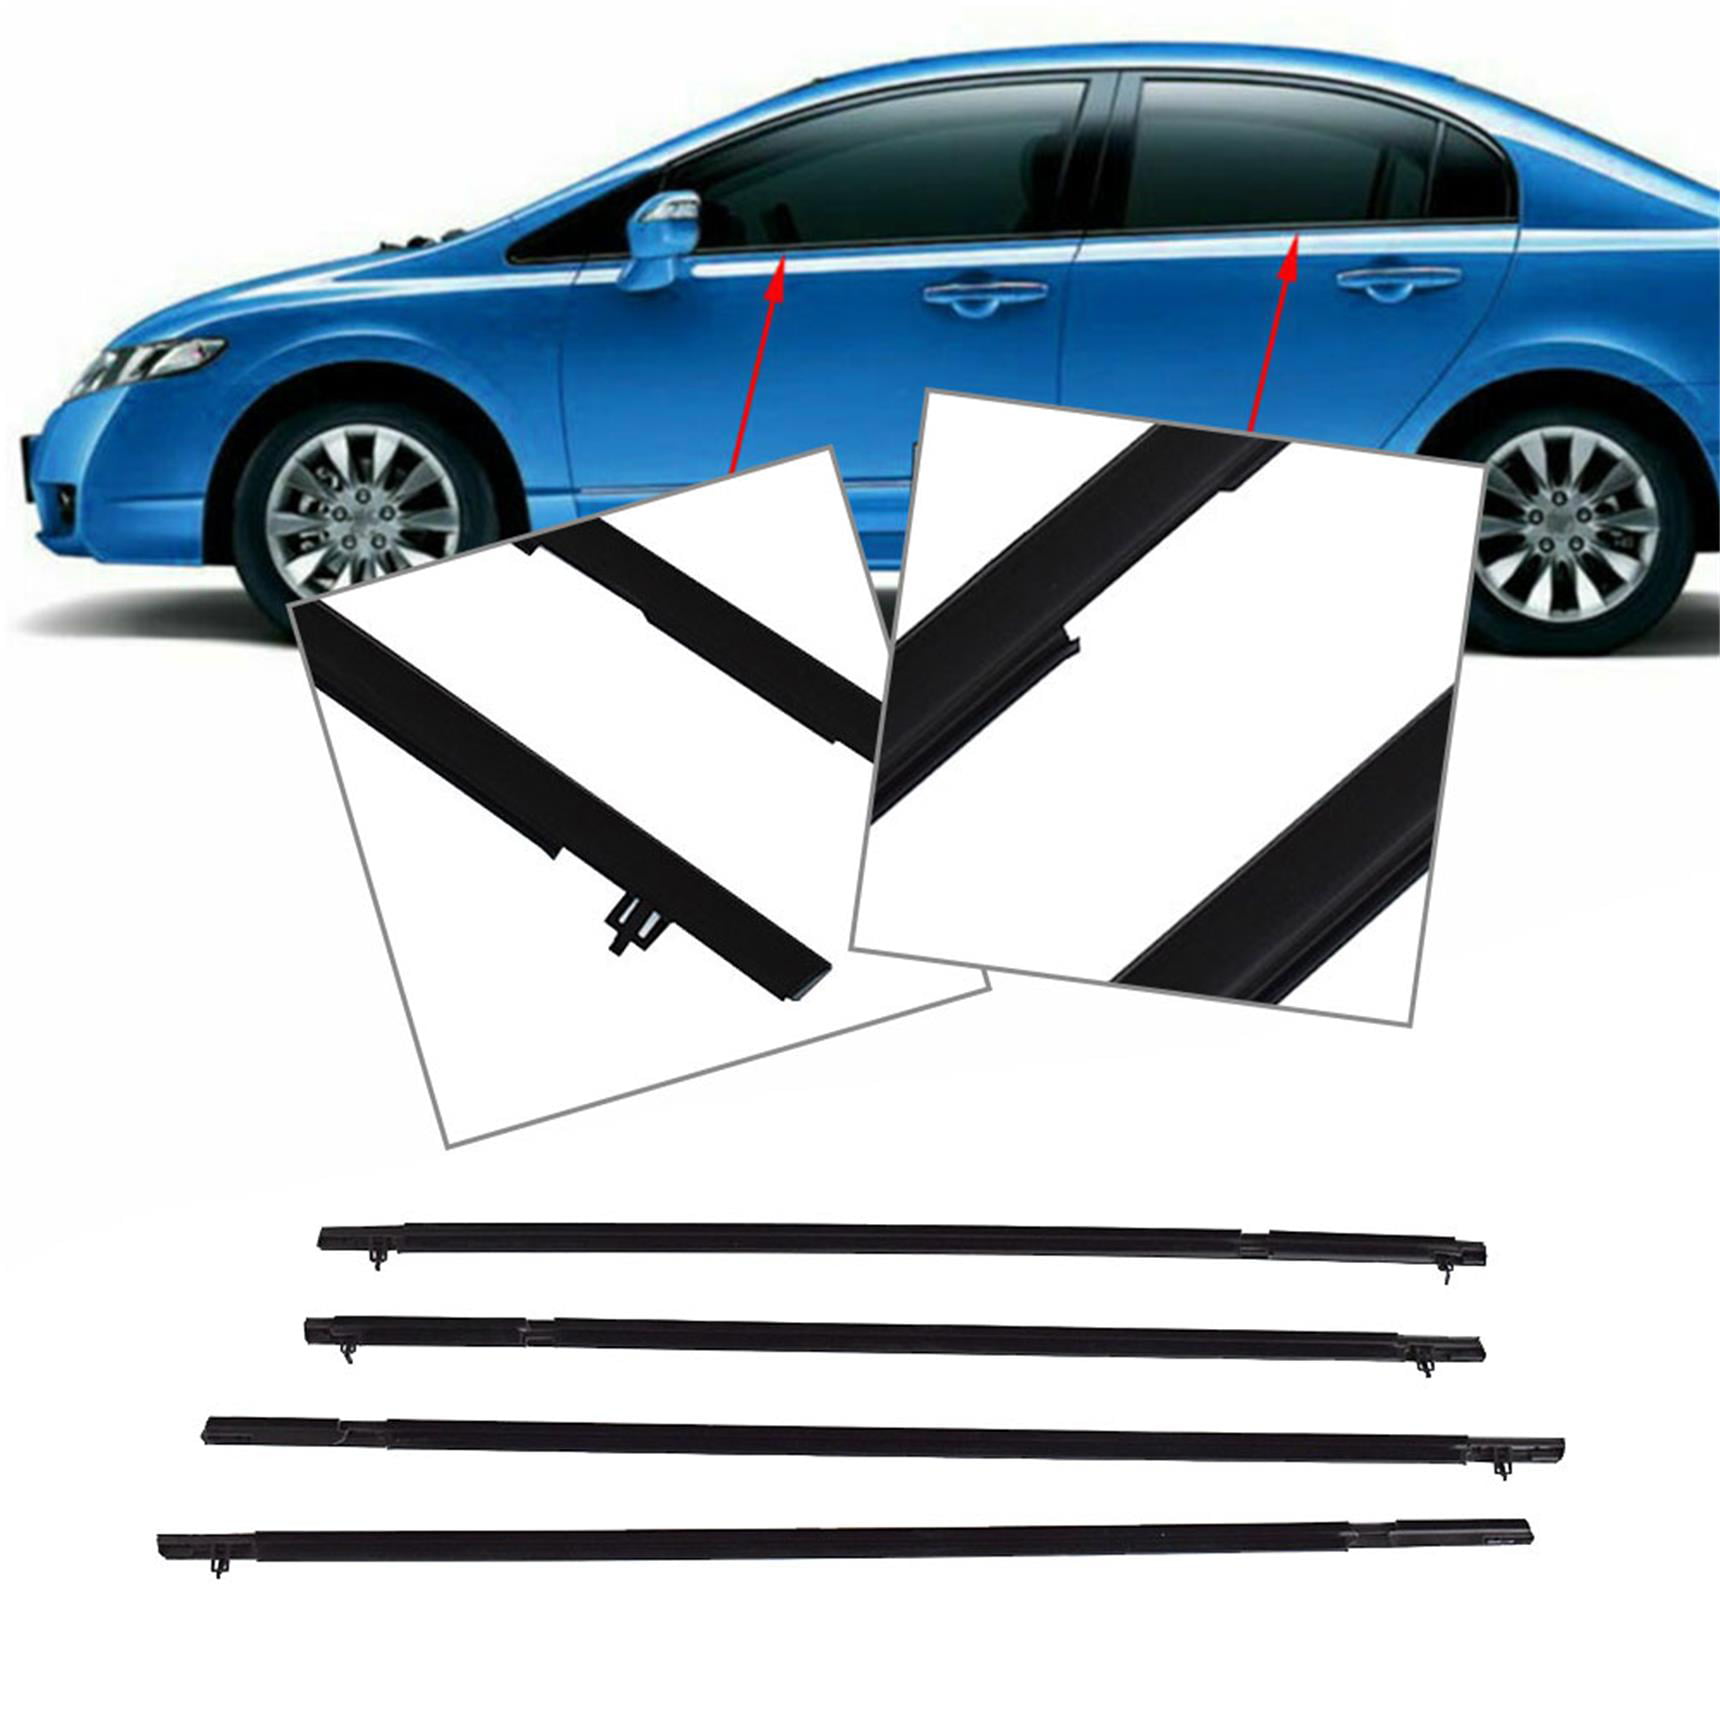  GZYF Window Weather Stripping, Window Seal Moulding  Weatherstrip for Honda Civic 2006 2007 2008 2009 2010 2011 : Automotive